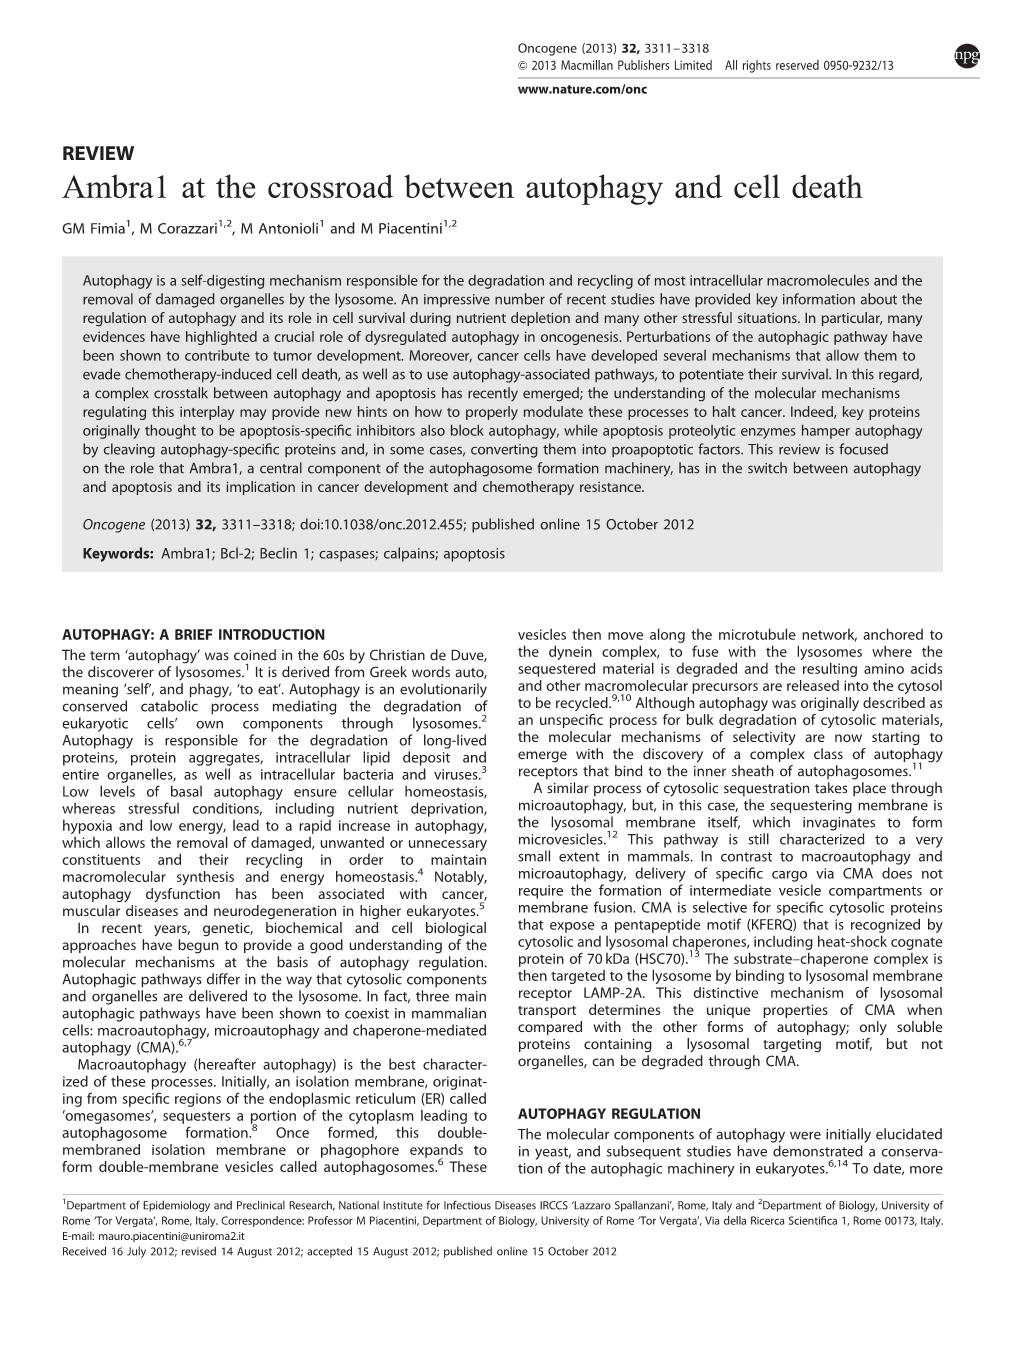 Ambra1 at the Crossroad Between Autophagy and Cell Death